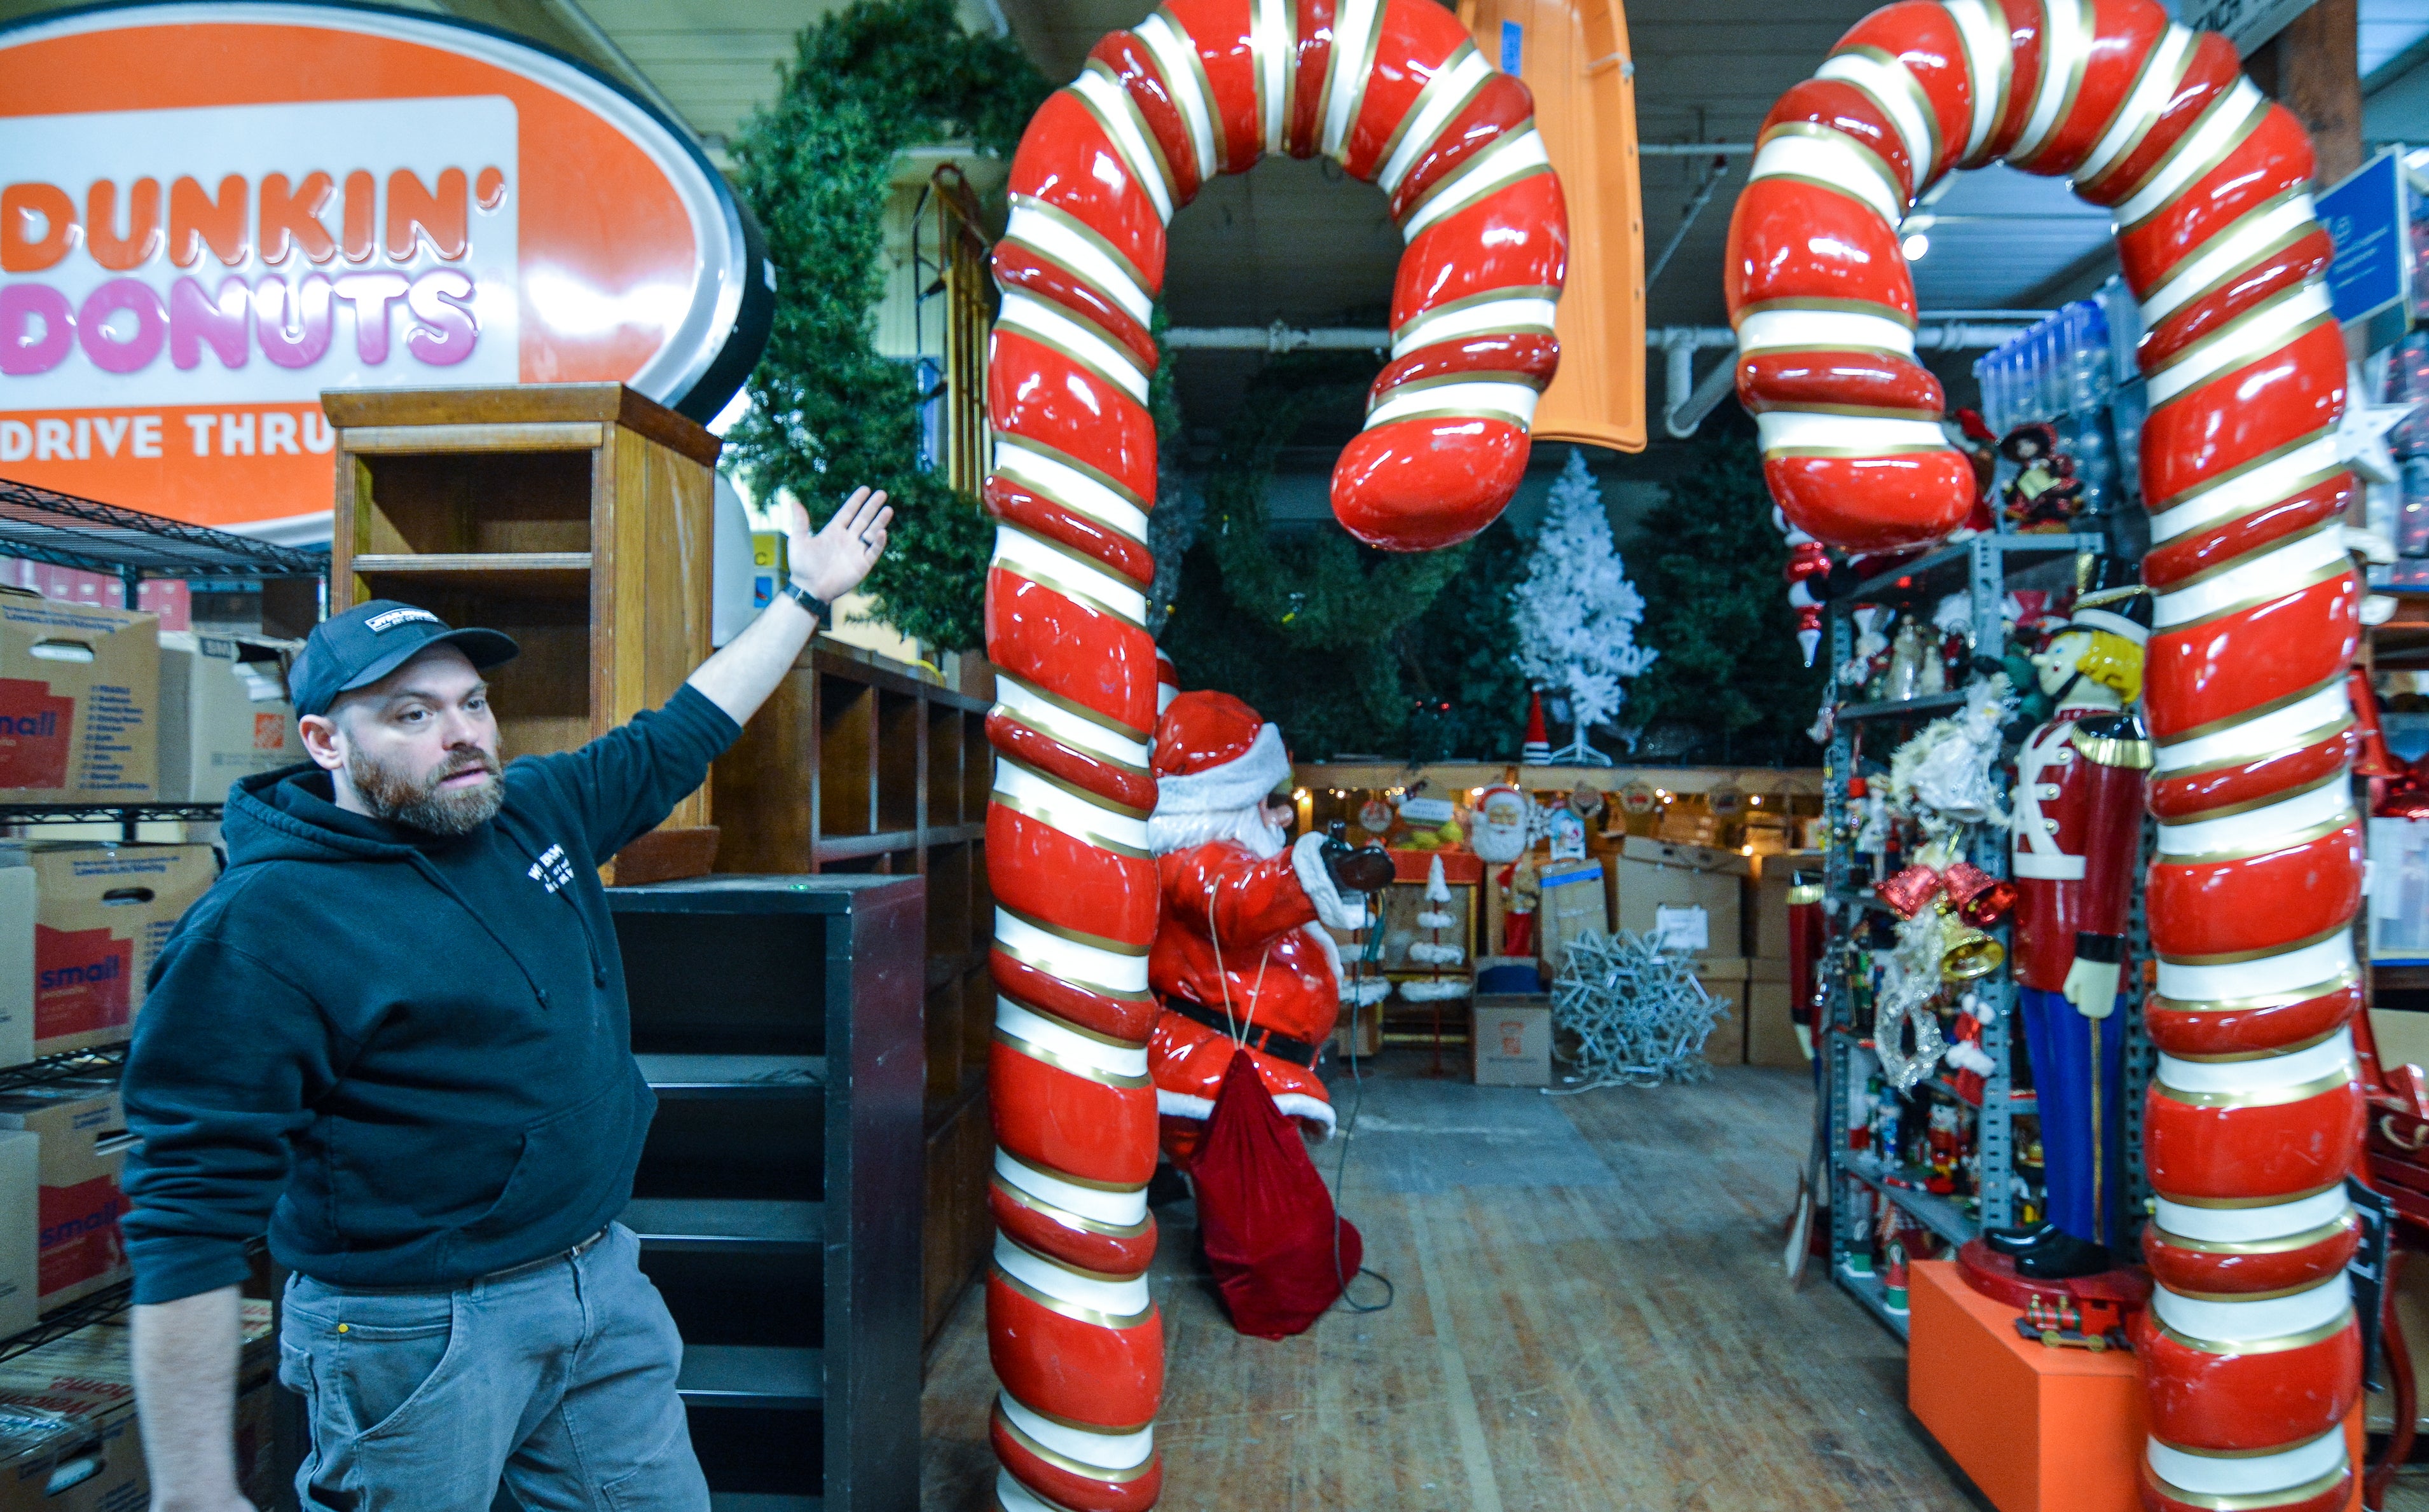 A man points at two very large candy canes